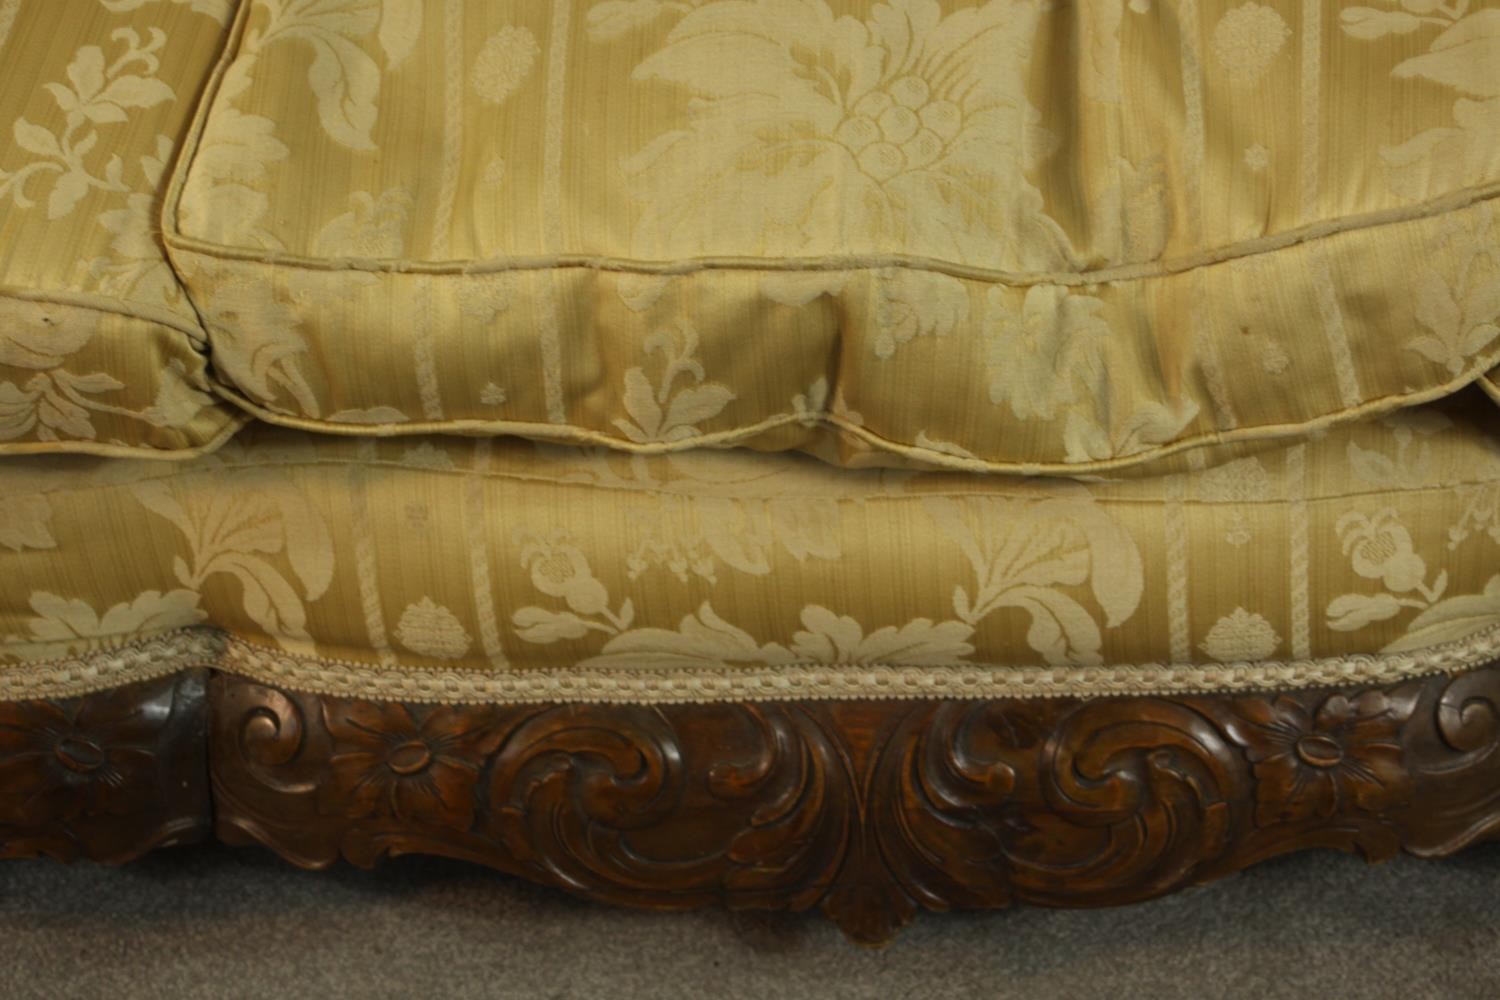 An early 20th century Continental carved walnut three seater bergere sofa, upholstered in gold - Image 7 of 18